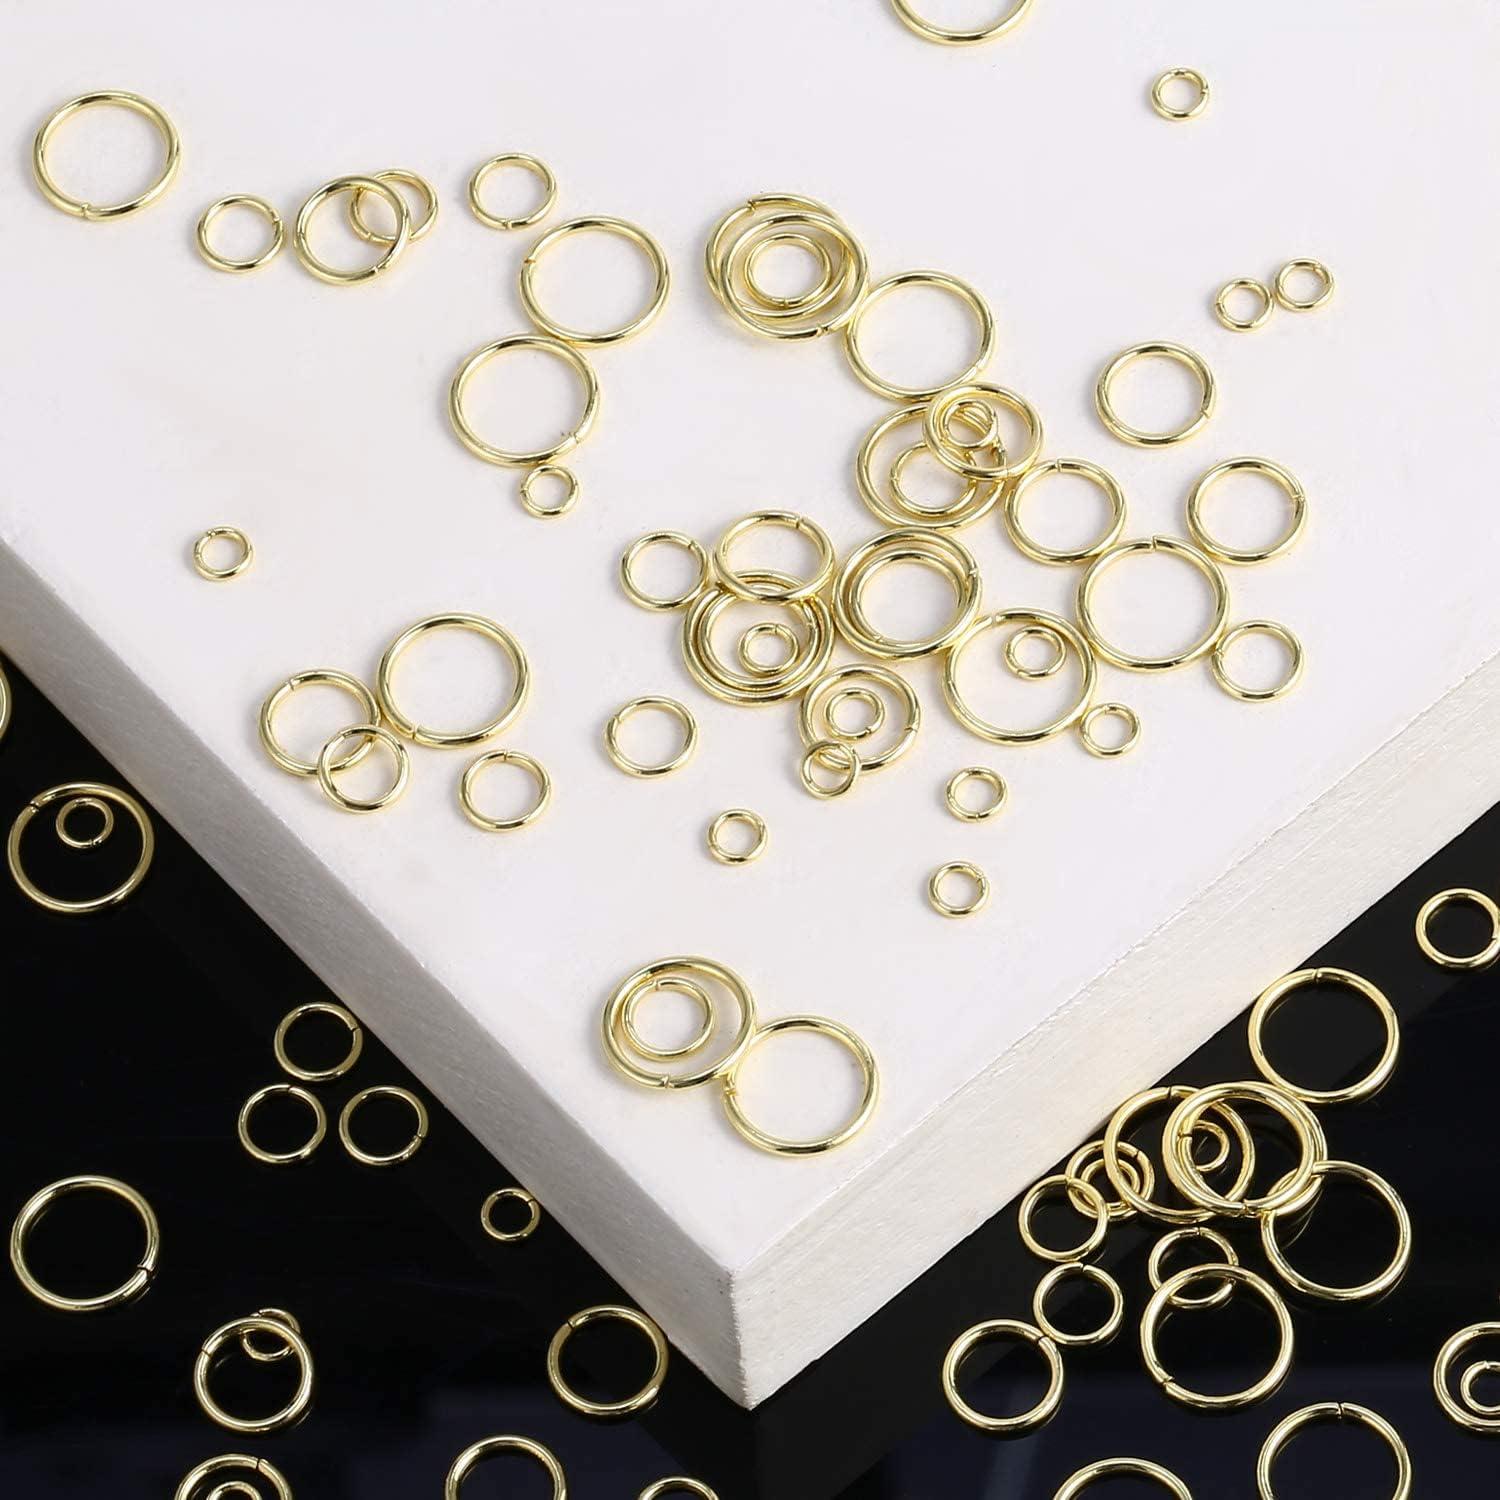 Extra Large Jump Rings for Keychain Bracelets - Gold or Silver